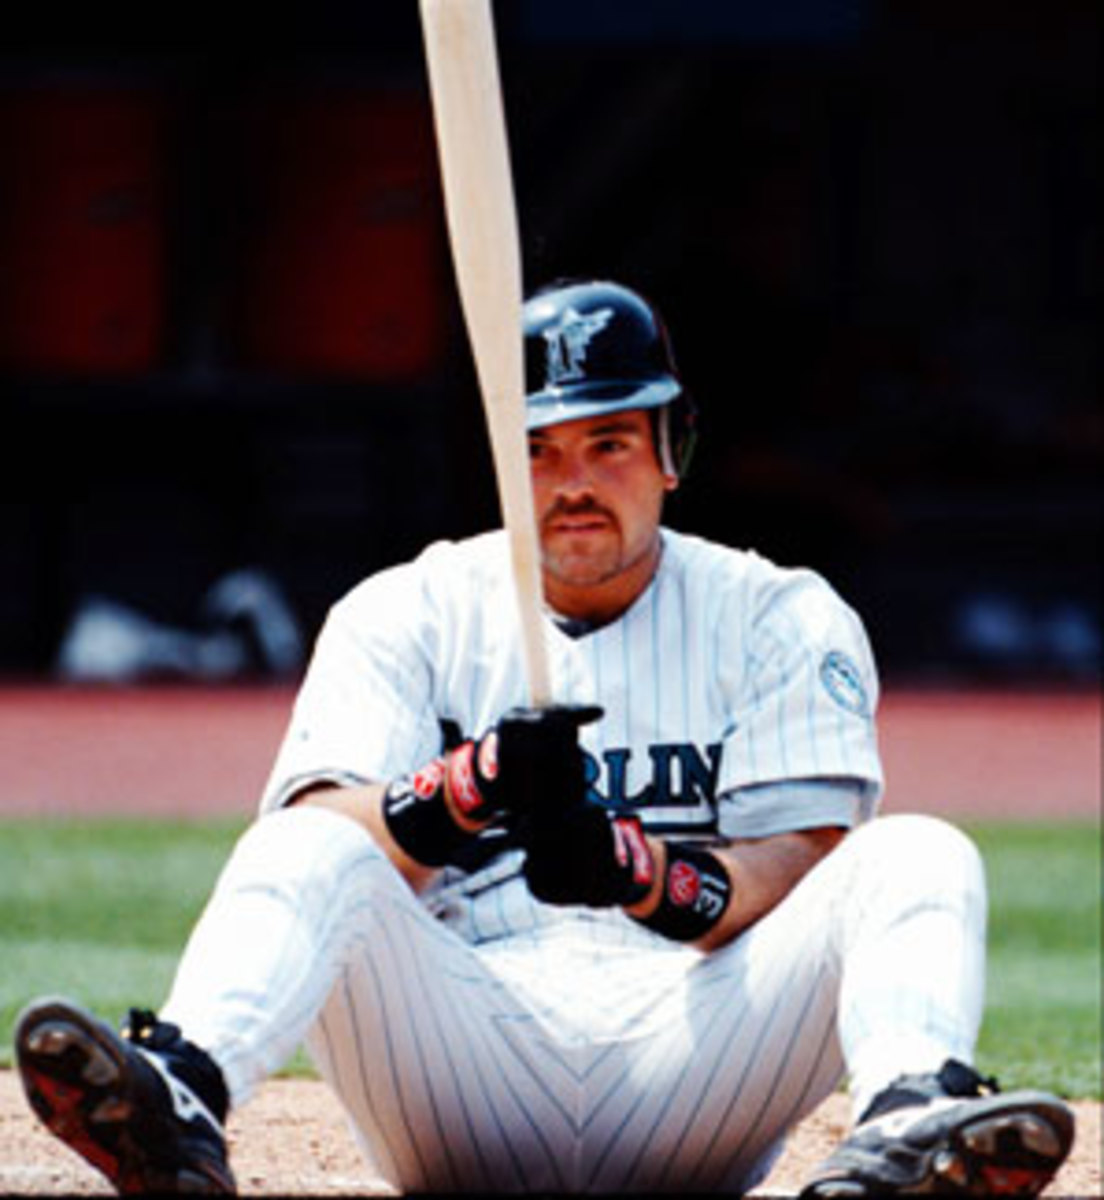 17 years ago, Mike Piazza got traded to the Marlins for five